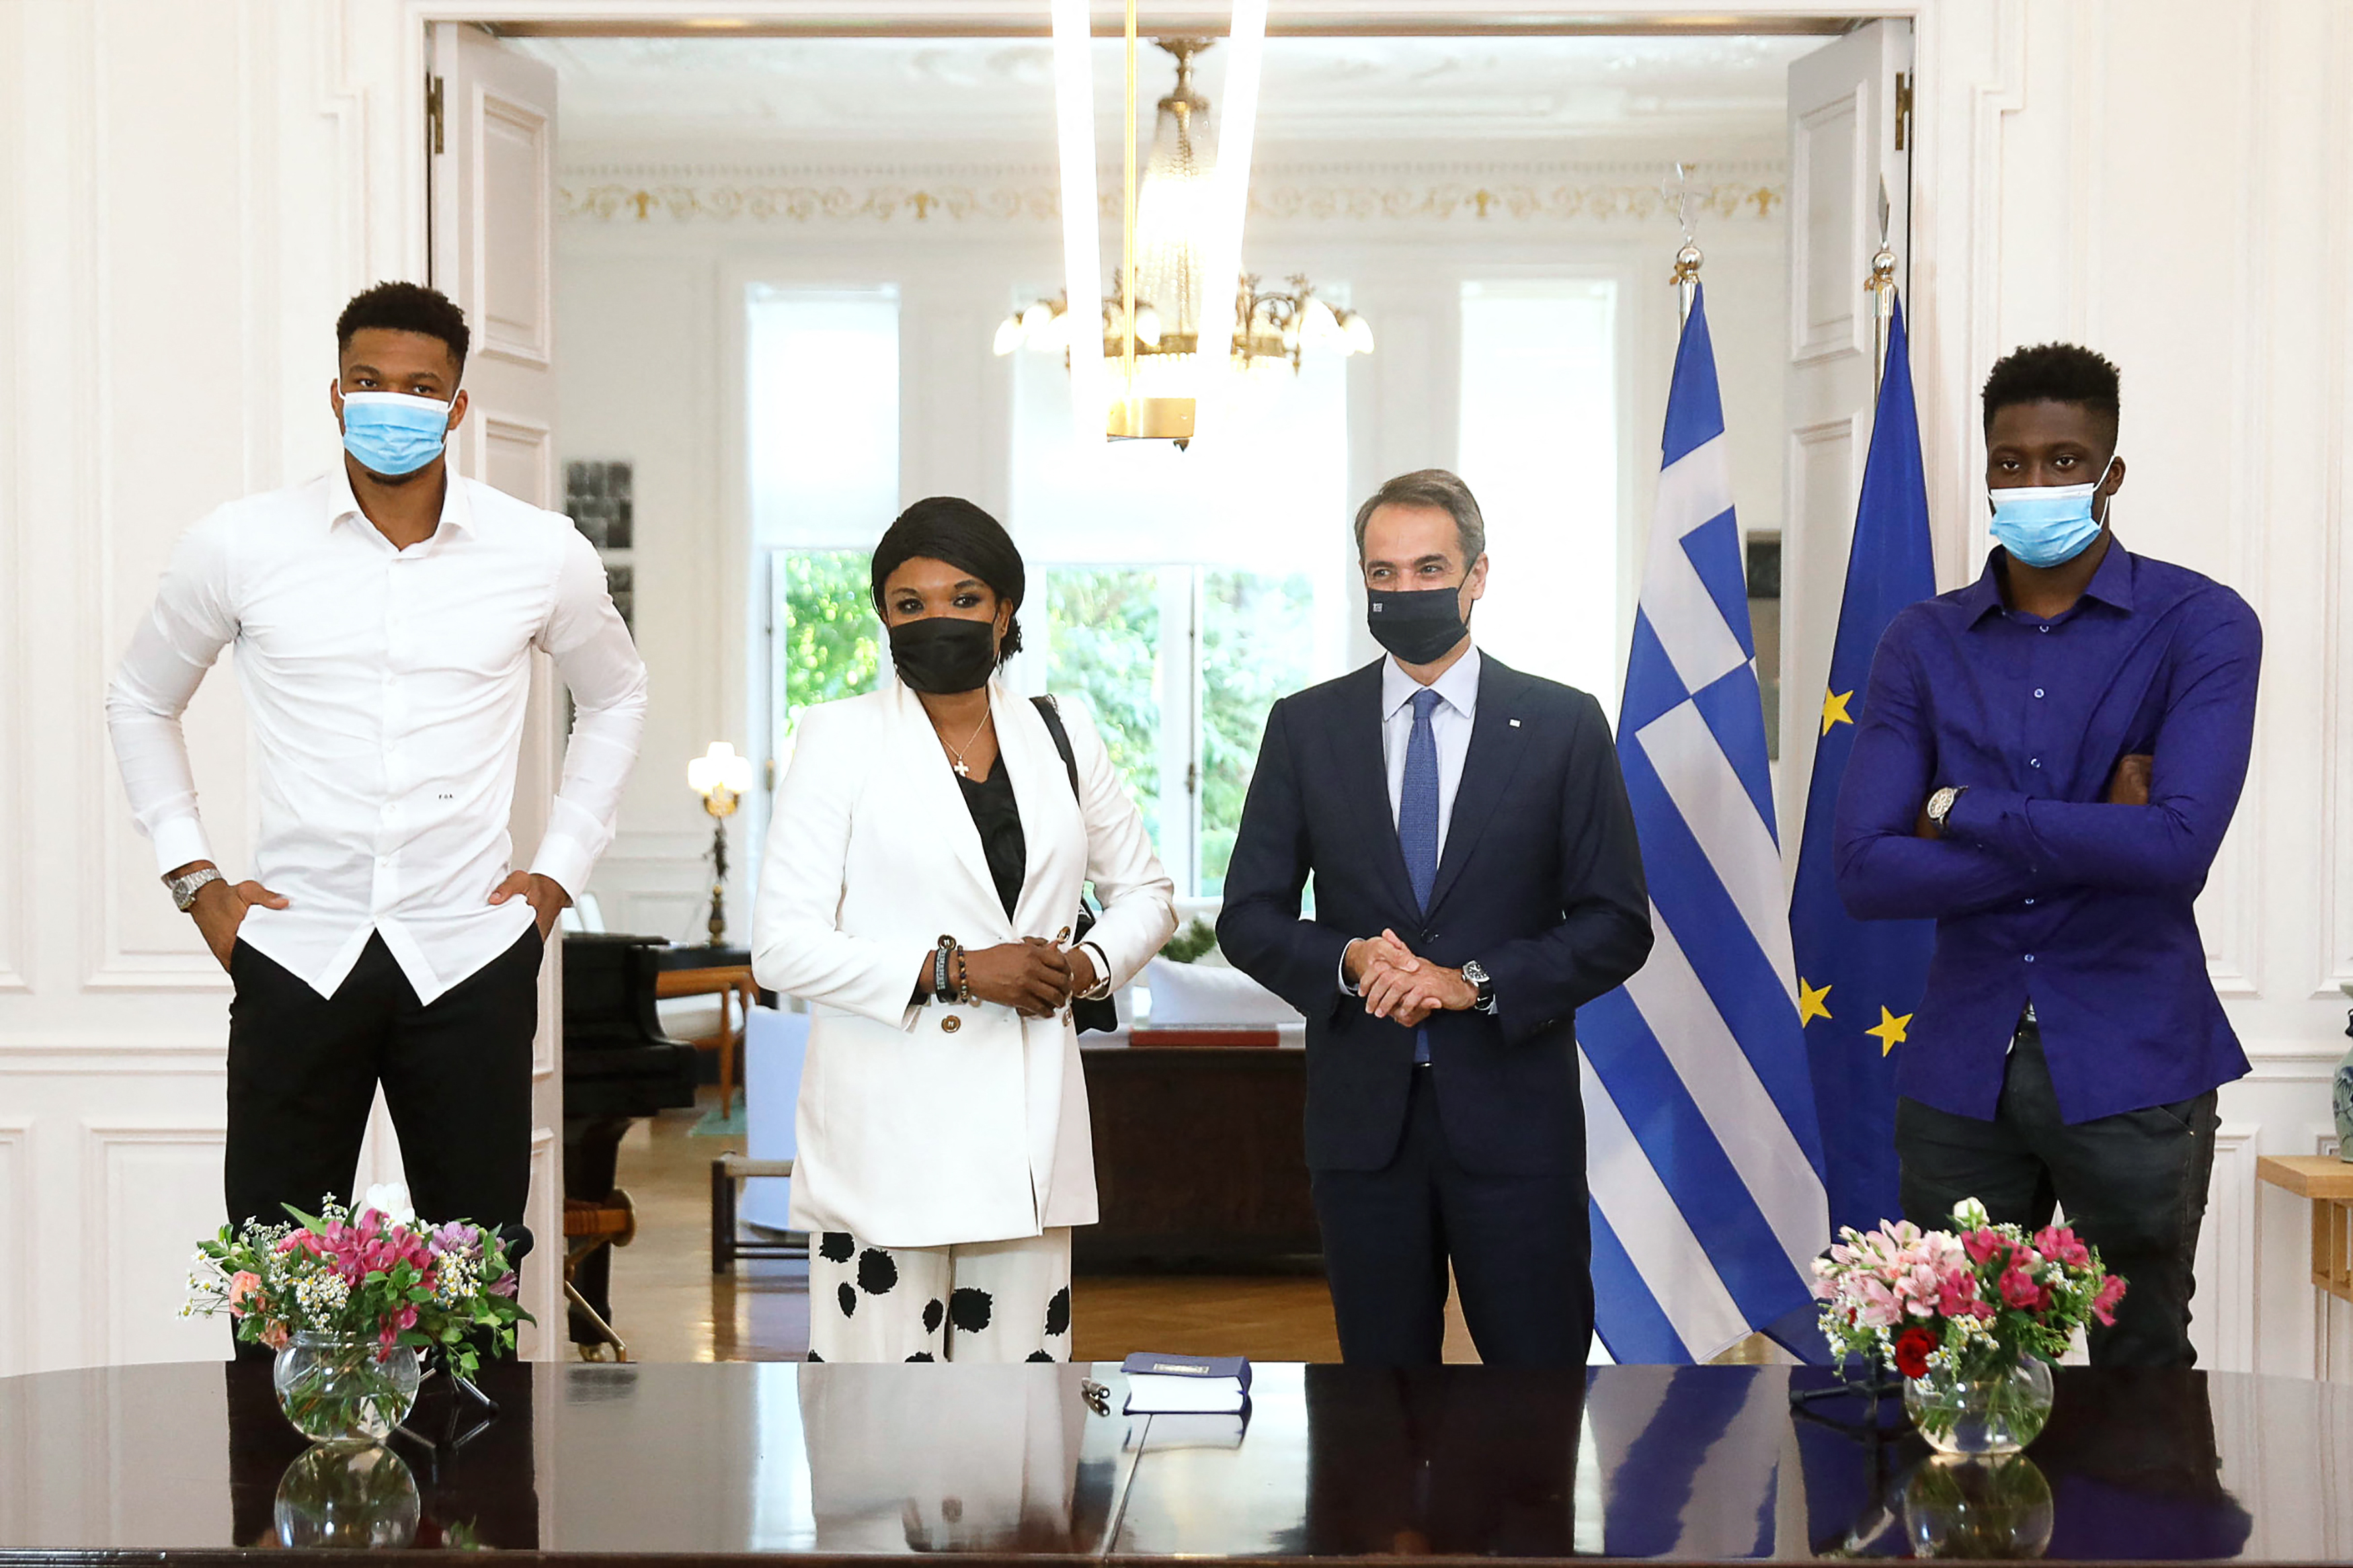 Greek Prime Minister Kyriakos Mitsotakis, Giannis Antetokounmpo, Veronica Antetokounmpo, and Alex Antetokounmpo after a naturalisation ceremony for Giannis' relatives at the Maximos Mansion in Athens, on September 16, 2021. | Source: Getty Images